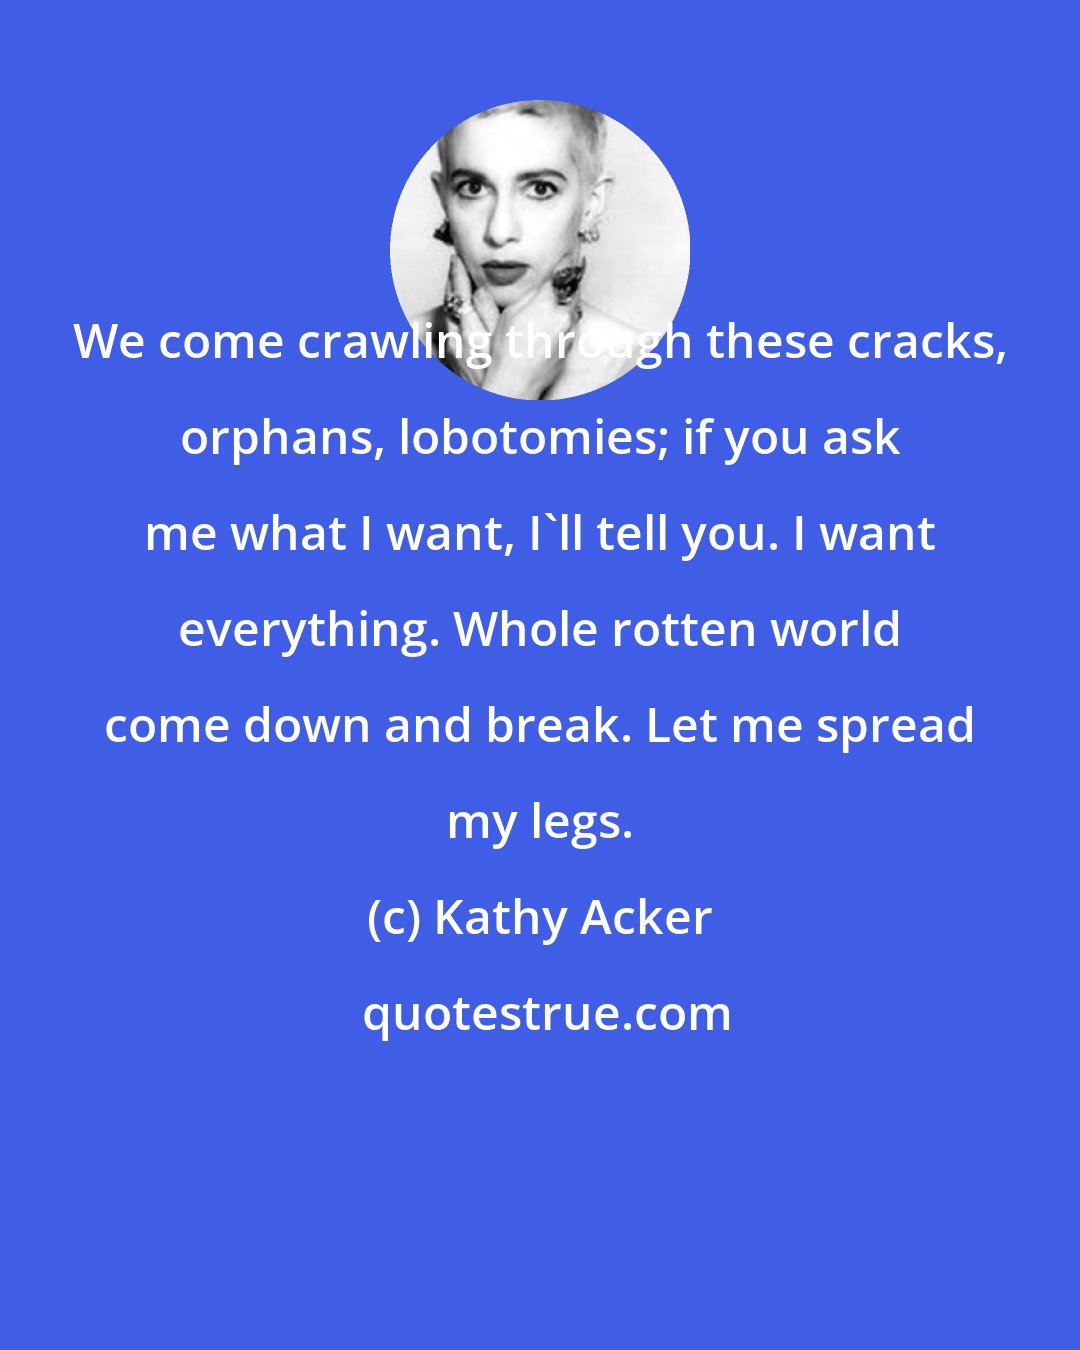 Kathy Acker: We come crawling through these cracks, orphans, lobotomies; if you ask me what I want, I'll tell you. I want everything. Whole rotten world come down and break. Let me spread my legs.